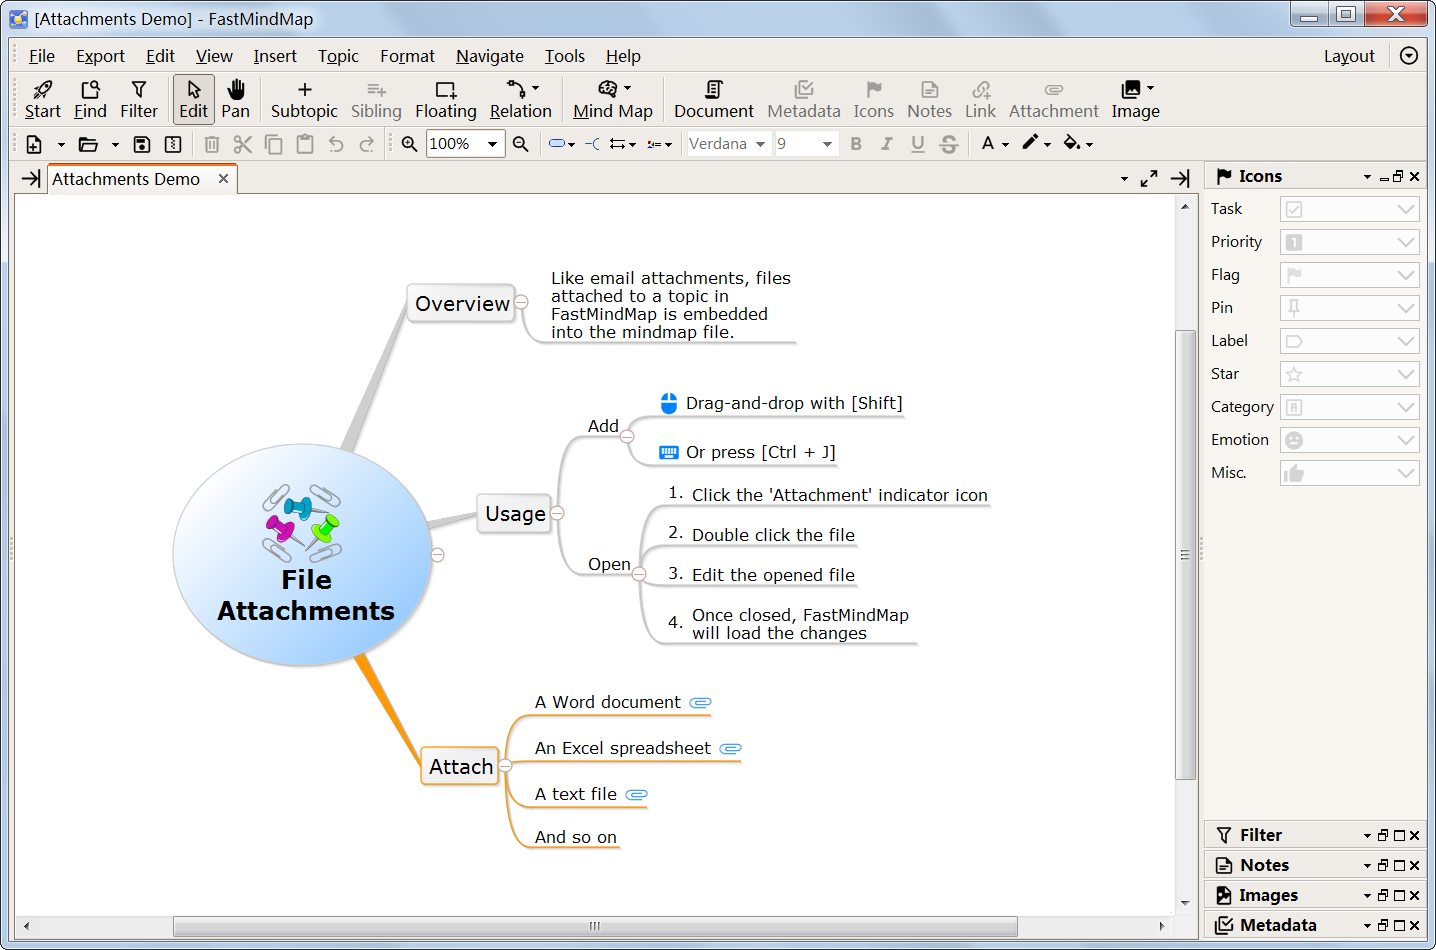 File attachments in a mindmap/concept map